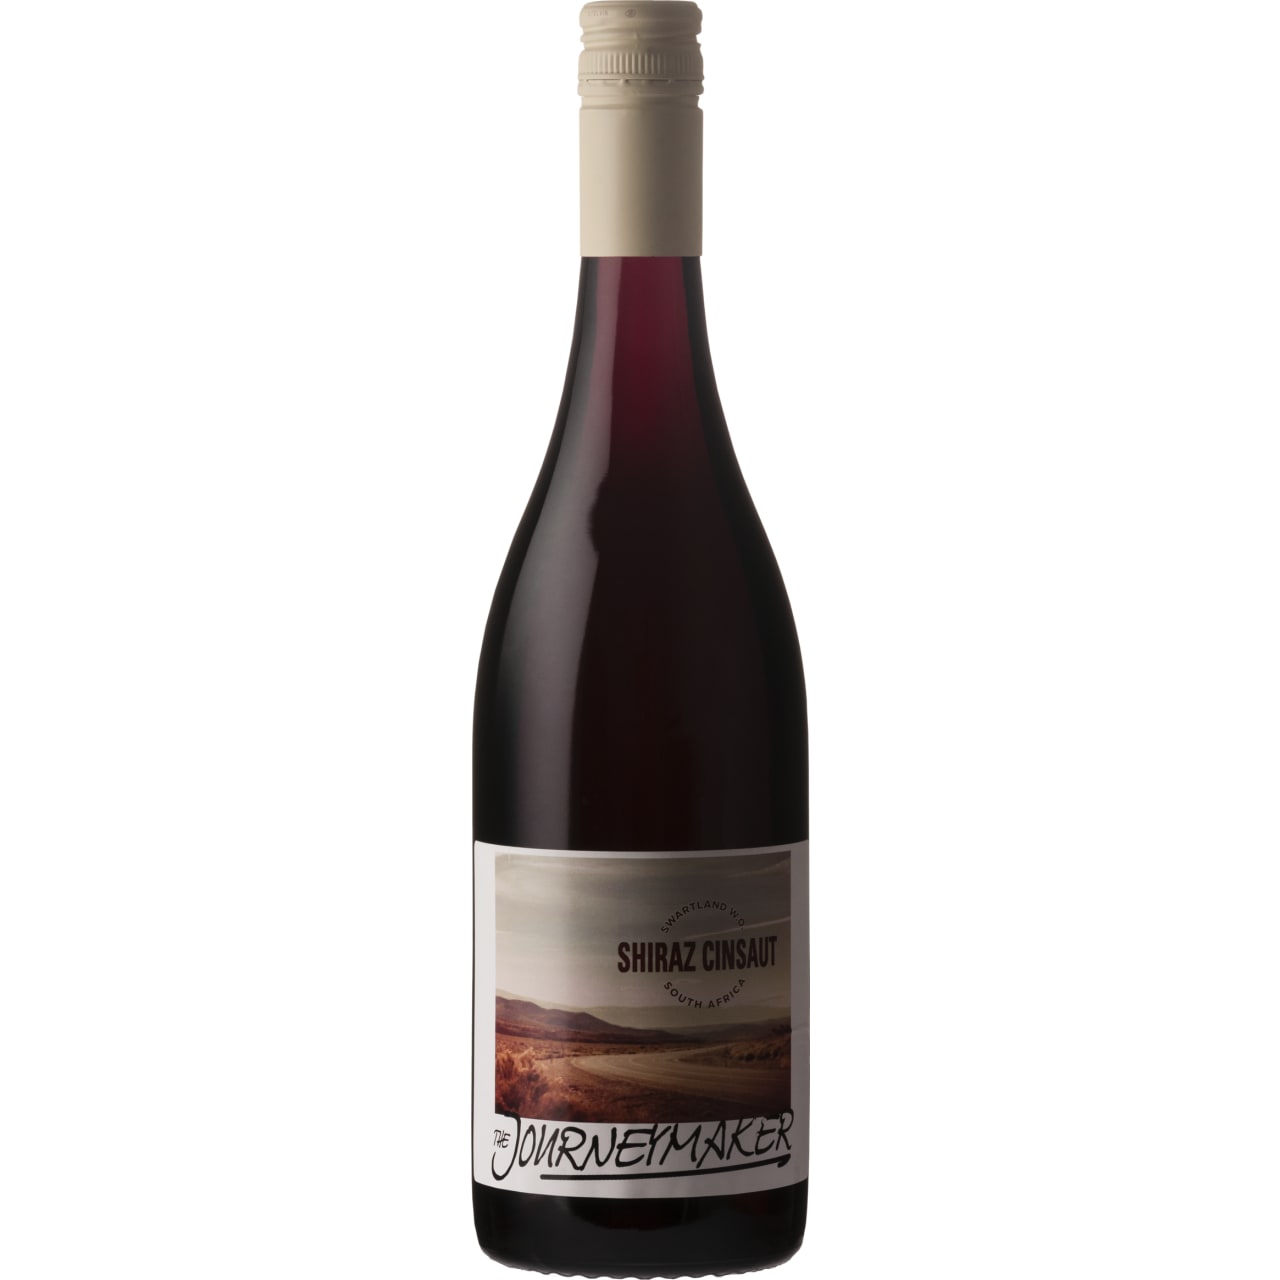 Lustrous ruby red. This exciting blend of Shiraz and Cinsault displays an array of ripe red berries.